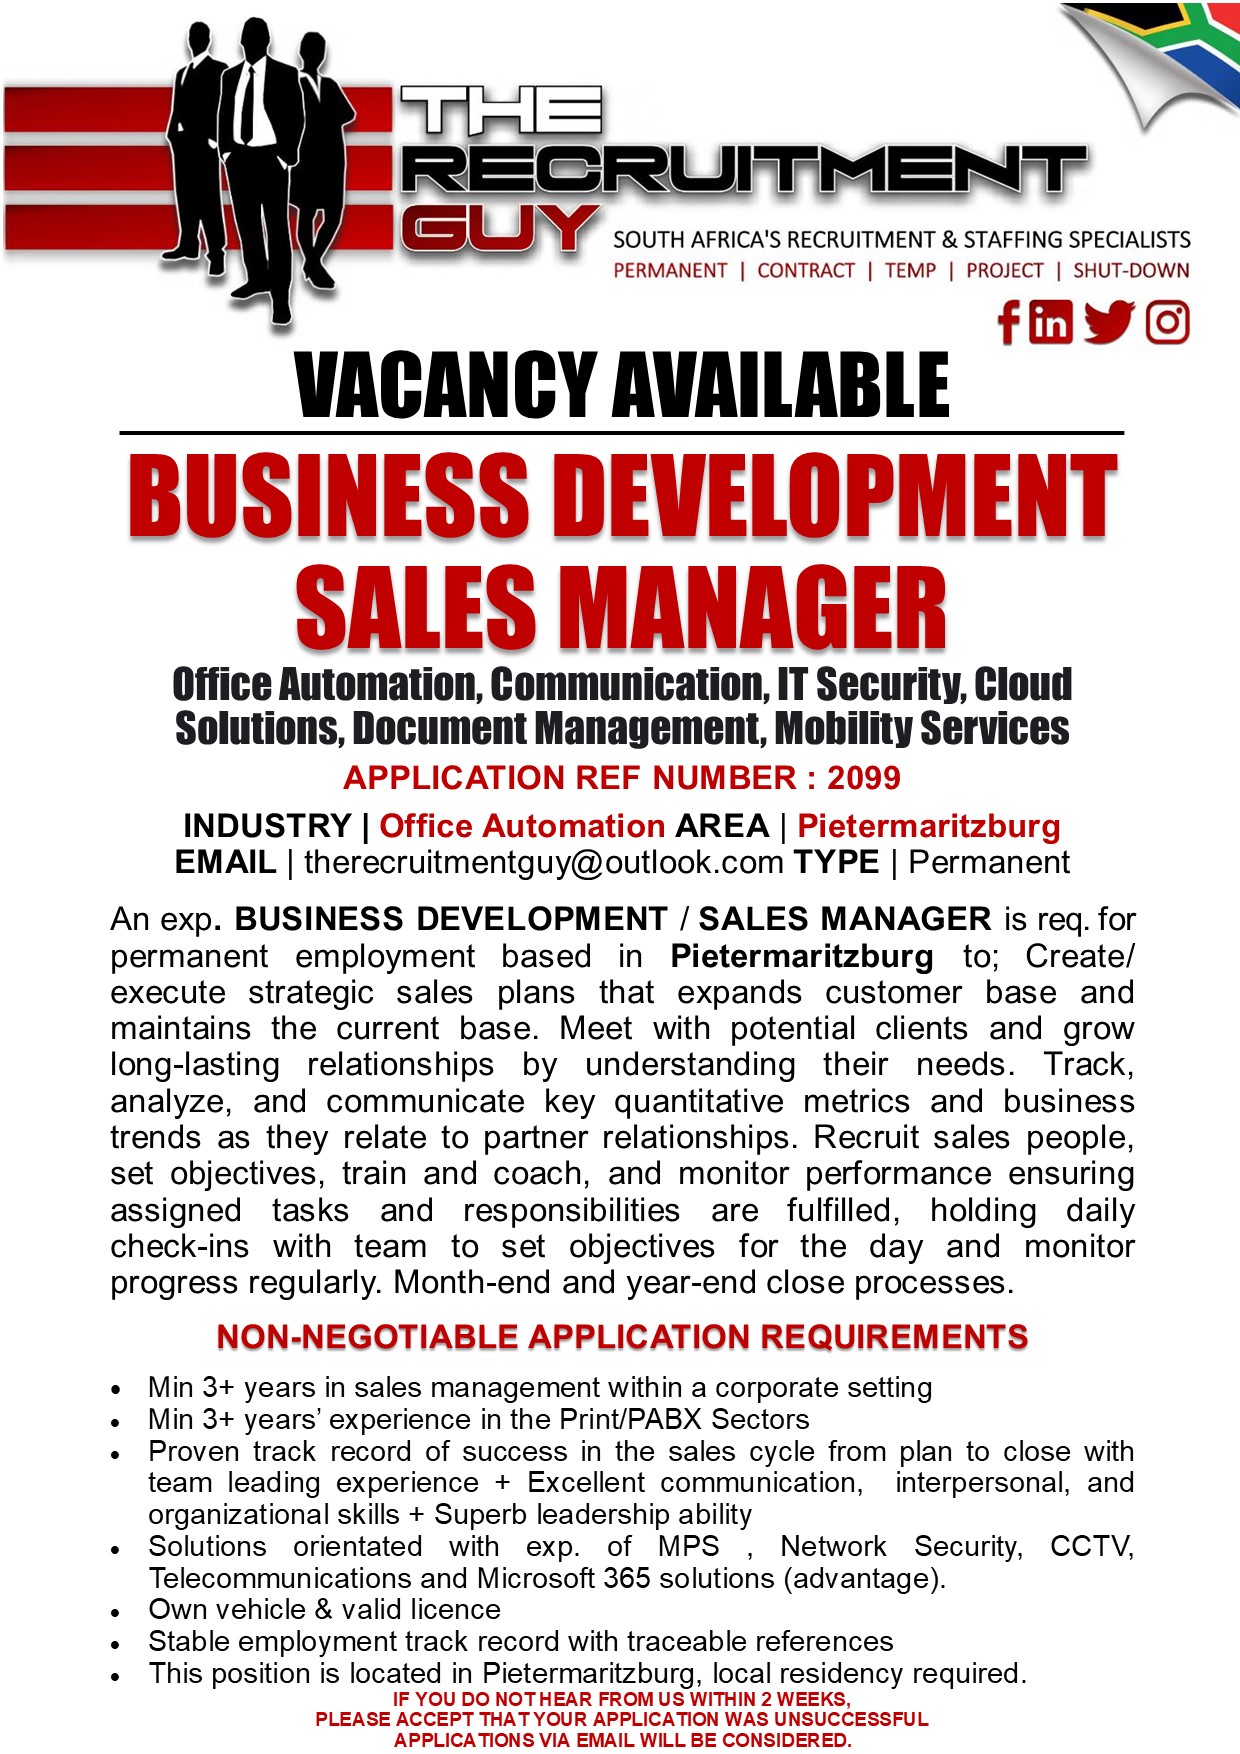 VACANCY AVAILABLE

BUSINESS DEVELOPMENT
SALES MANAGER

Office Automation, Communication, IT Security, Cloud
Solutions, Document Management, Mobility Services
APPLICATION REF NUMBER : 2099

INDUSTRY | Office Automation AREA | Pietermaritzburg
EMAIL | therecruitmentguy@outlook.com TYPE | Permanent

An exp. BUSINESS DEVELOPMENT / SALES MANAGER is req. for
permanent employment based in Pietermaritzburg to; Create/
execute strategic sales plans that expands customer base and
maintains the current base. Meet with potential clients and grow
long-lasting relationships by understanding their needs. Track,
analyze, and communicate key quantitative metrics and business
trends as they relate to partner relationships. Recruit sales people,
set objectives, train and coach, and monitor performance ensuring
assigned tasks and responsibilities are fulfilled, holding daily
check-ins with team to set objectives for the day and monitor
progress regularly. Month-end and year-end close processes.

NON-NEGOTIABLE APPLICATION REQUIREMENTS

+ Min 3+ years in sales management within a corporate setting

+ Min 3+ years’ experience in the Print/PABX Sectors

« Proven track record of success in the sales cycle from plan to close with
team leading experience + Excellent communication, interpersonal, and
organizational skills + Superb leadership ability

« Solutions orientated with exp. of MPS | Network Security, CCTV,
Telecommunications and Microsoft 365 solutions (advantage)

« Own vehicle & valid licence

« Stable employment track record with traceable references

« This position is located in Pietermaritzburg, local residency required
IF YOU DO NOT HEAR FROM US WITHIN 2 WEEKS,
PLEASE ACCEPT THAT YOUR APPLICATION WAS UNSUCCESSFUL
APPLICATIONS VIA EMAIL WILL BE CONSIDERED.

GUY SOUTH AFRICA'S RECRUITMENT & STAFFING SPECIALISTS

PERMANENT | CONTRACT | TEMP | PROJECT | SHUT-DOWN

Yo